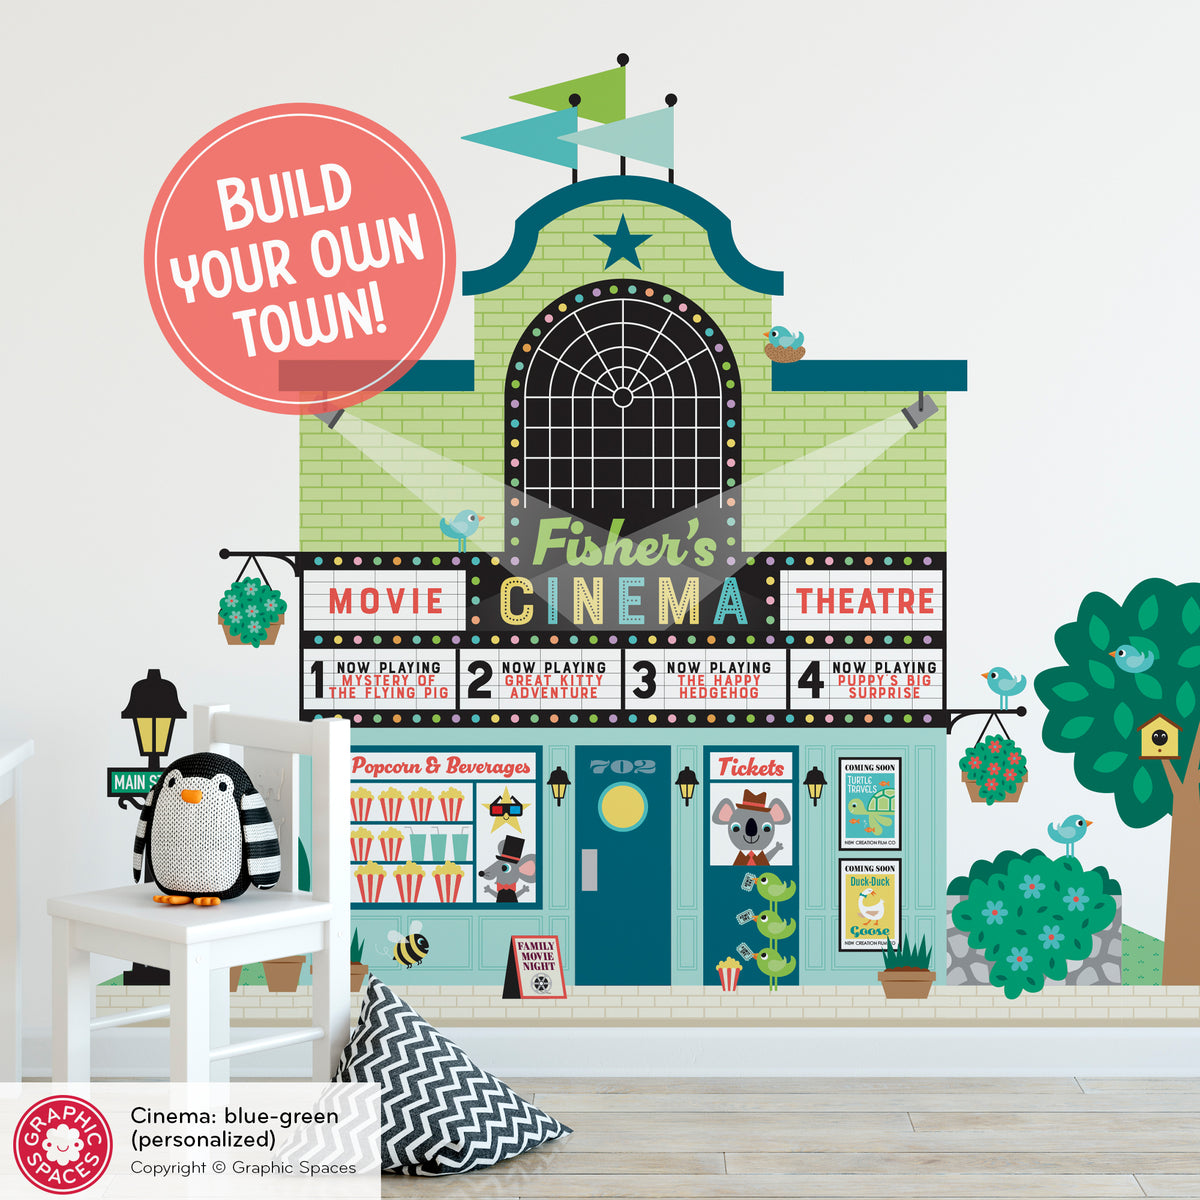 Movie Theatre Cinema Fabric Wall Decal - Blue-Green, Happy Town